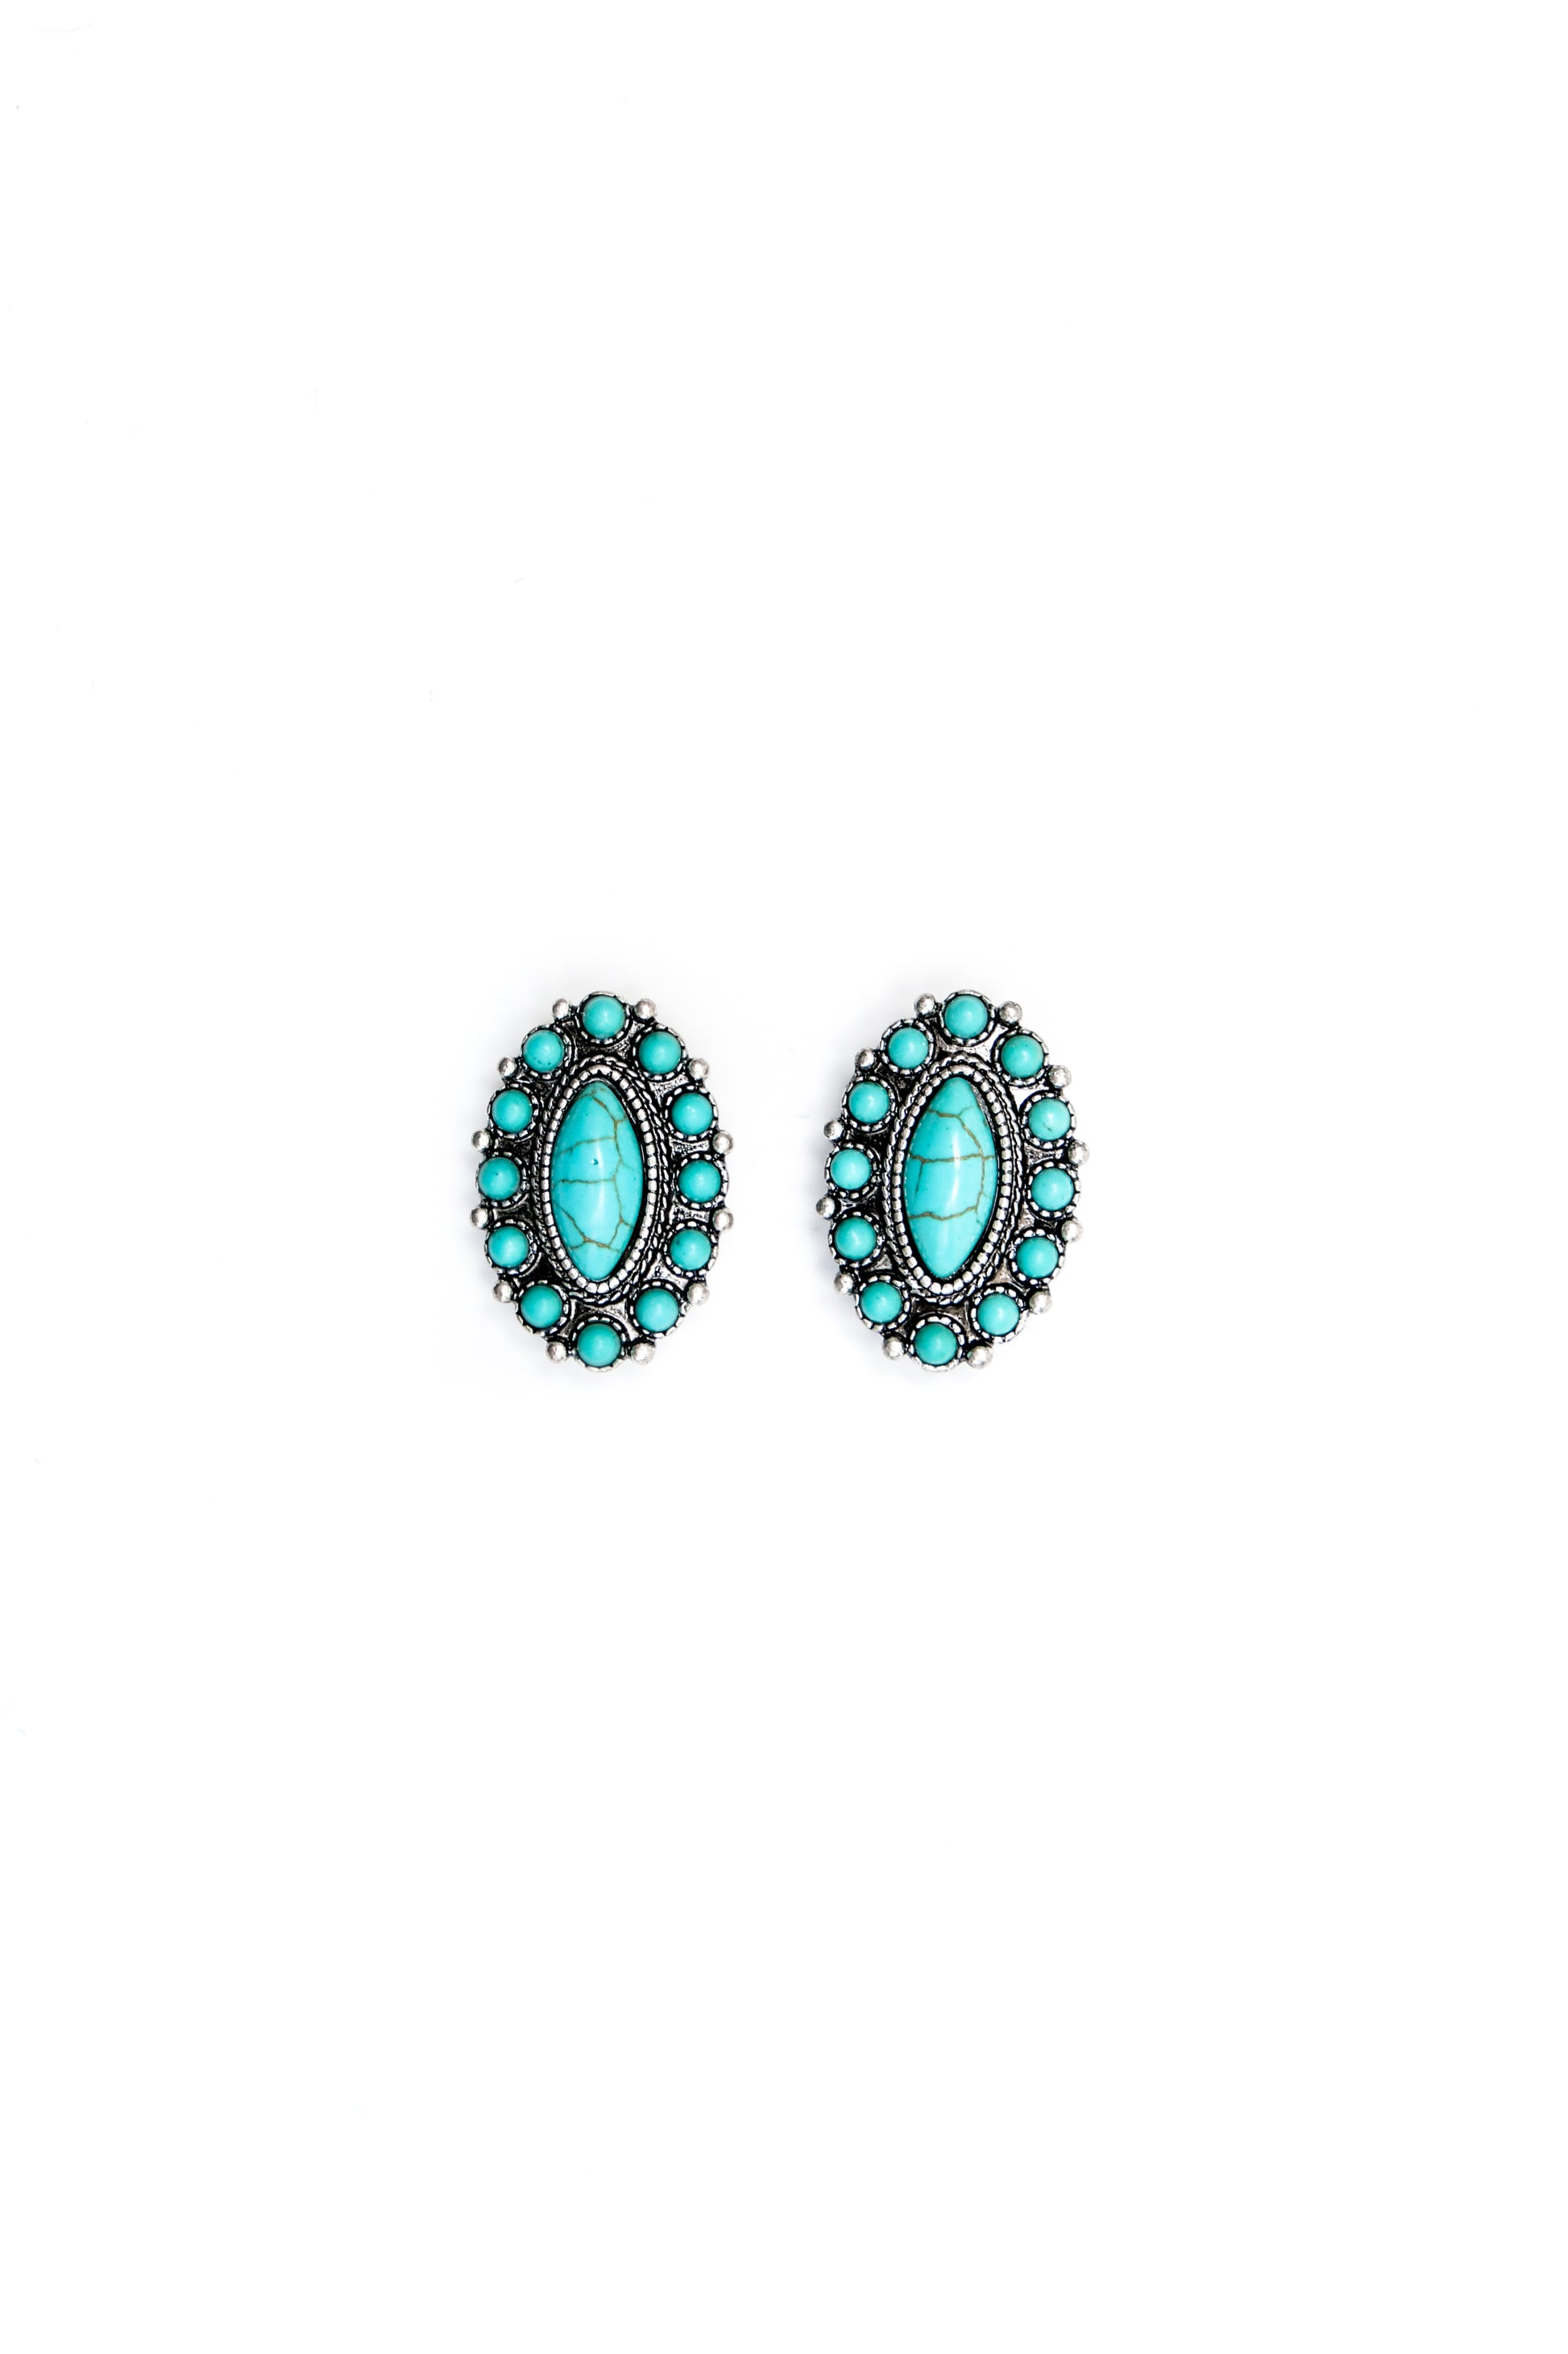 West and Co. Elongated Turquoise Post Earrings-Stud Earrings-West and Co.--The Twisted Chandelier